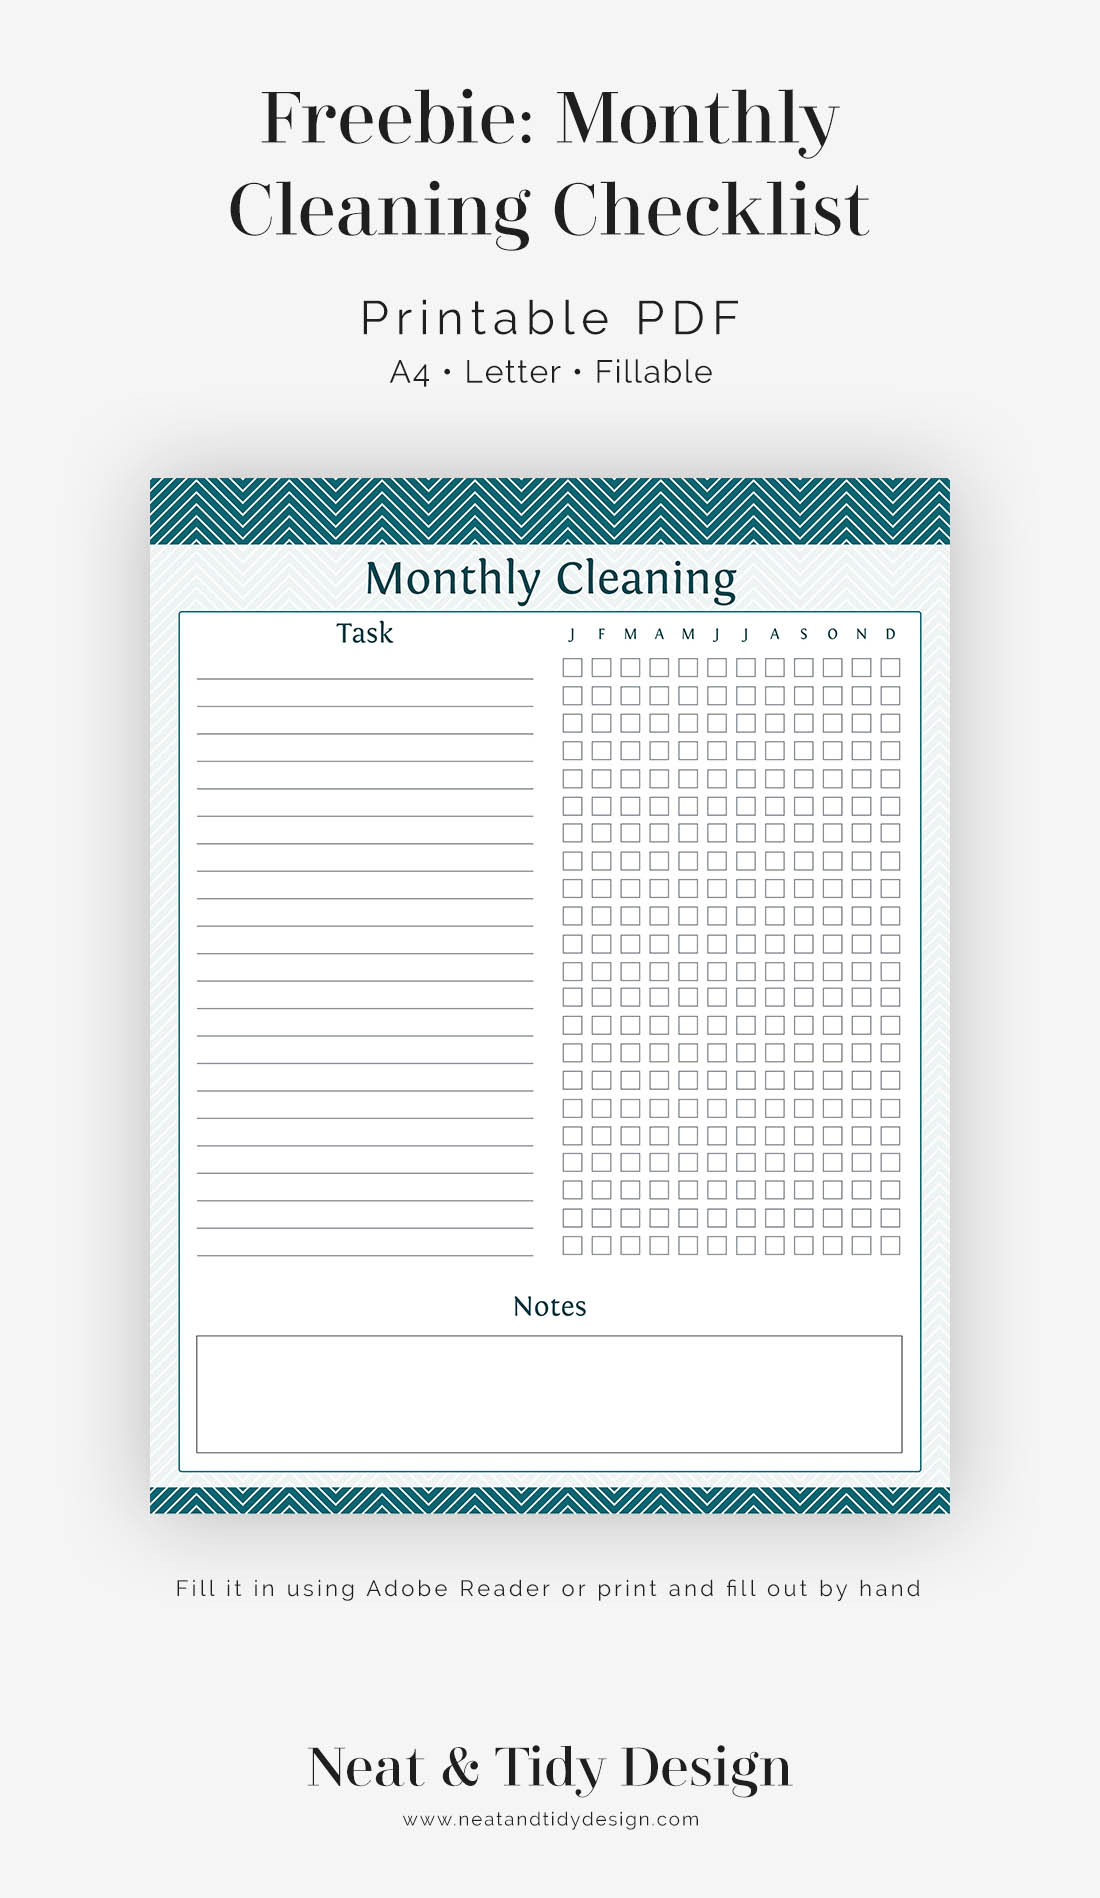 Free printable Monthly Cleaning Checklist Neat and Tidy Design